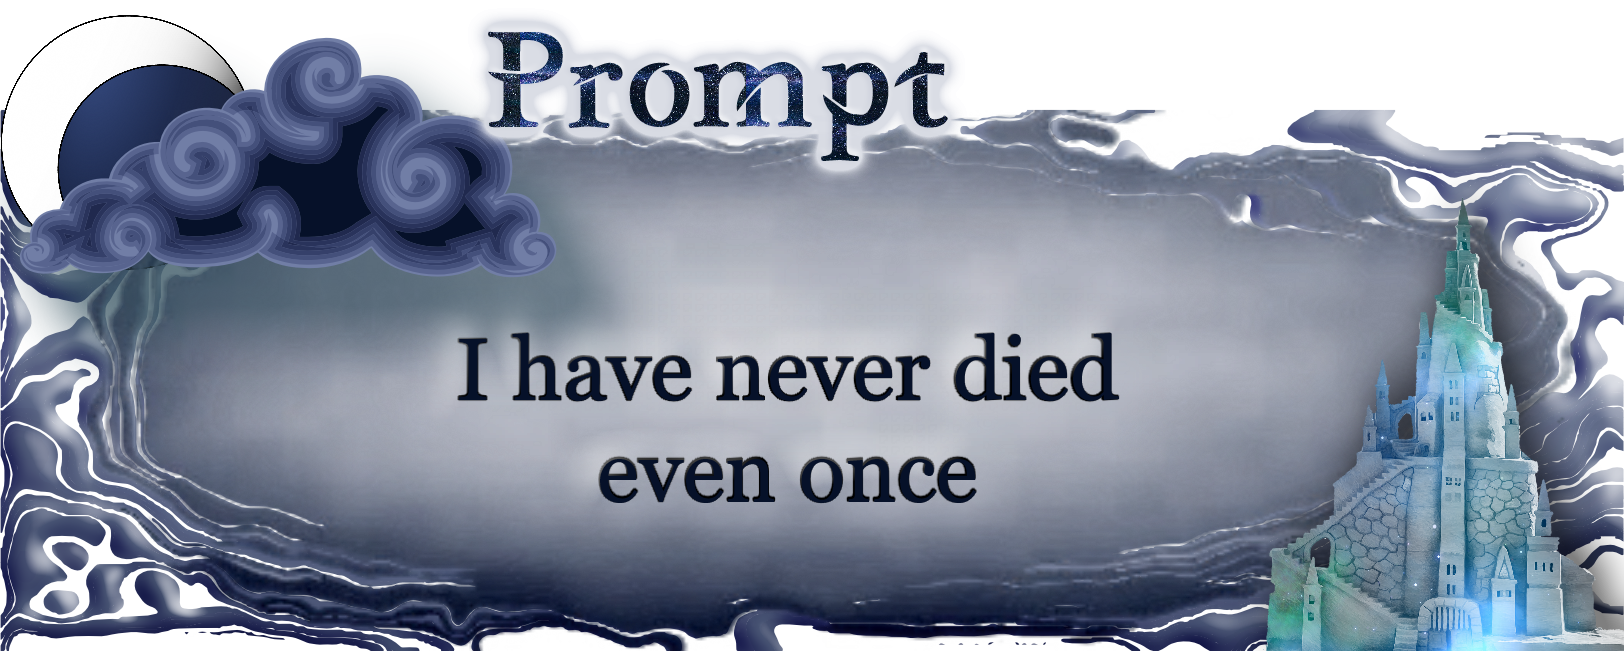 Word Prompt: I have never died even once